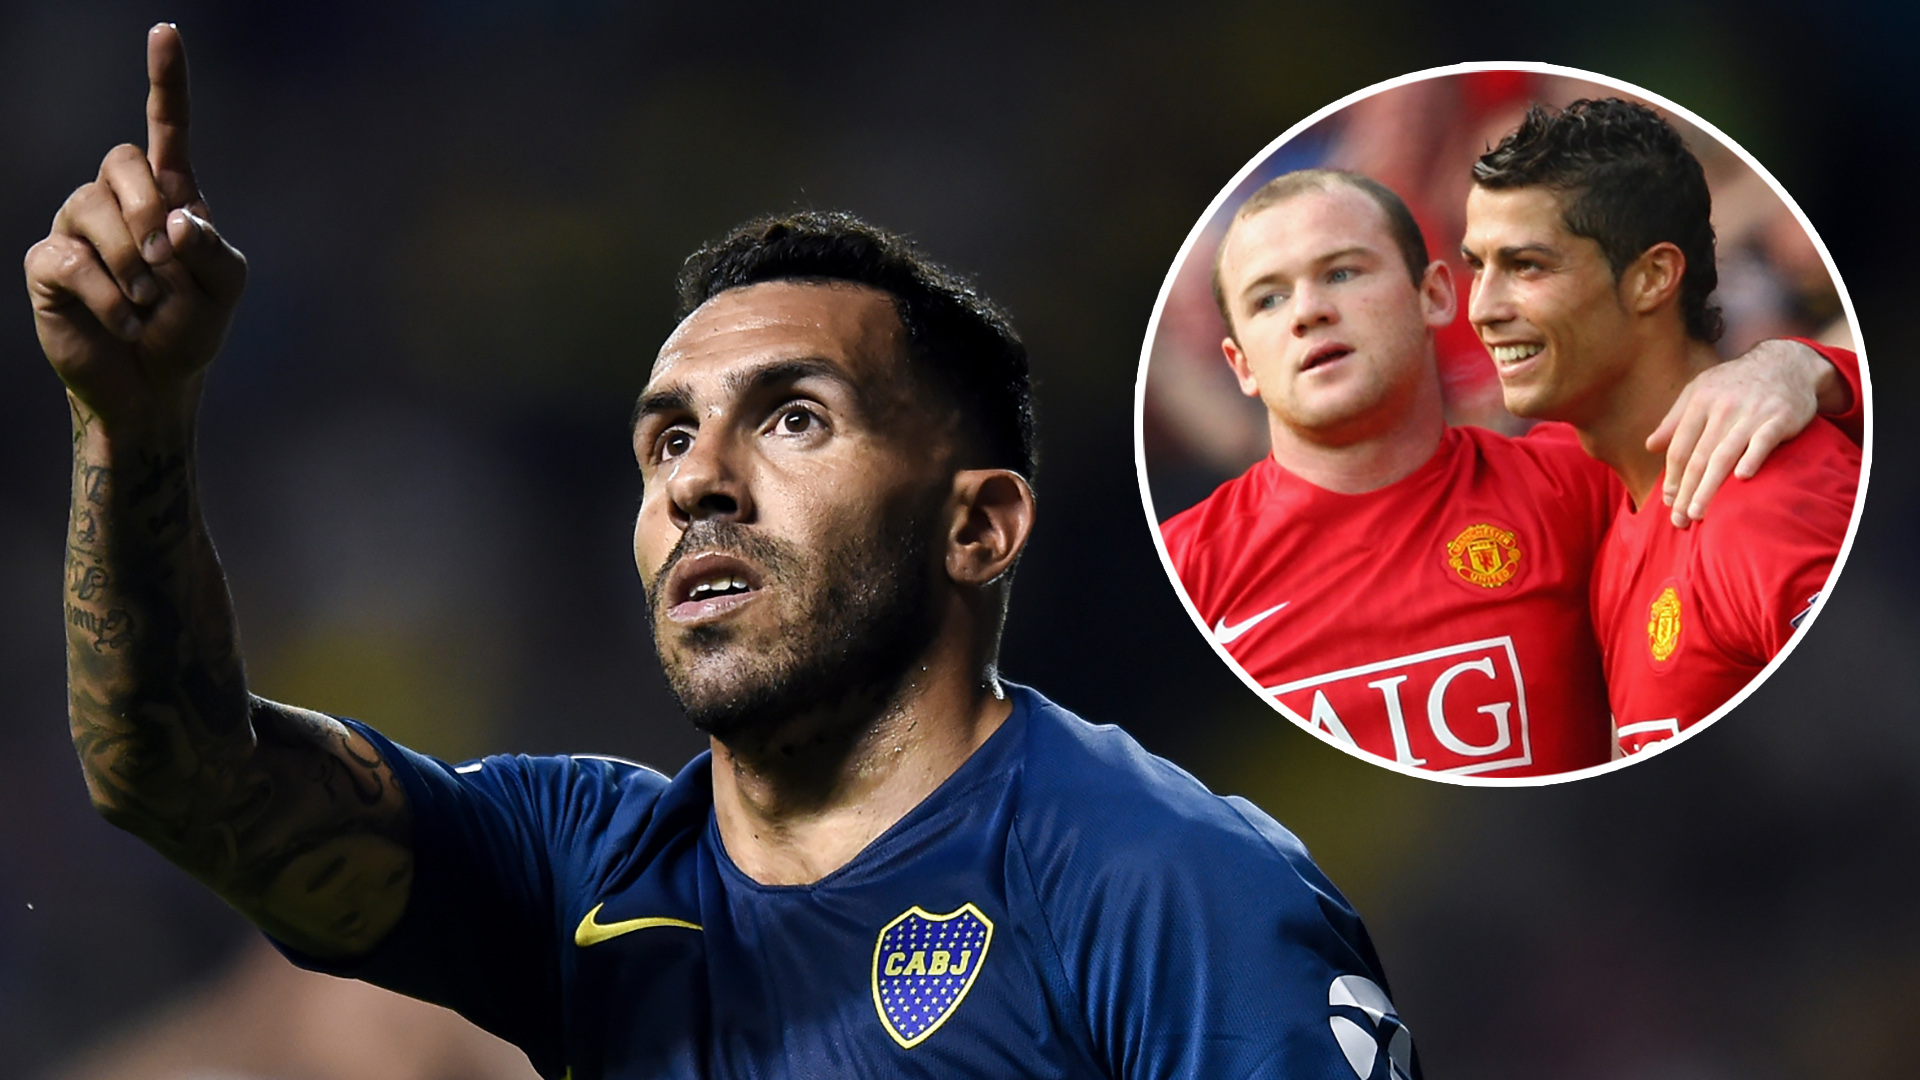 Ronaldo & Rooney join Messi in Tevez's dream XI as seven Man Utd players feature but City stars snubbed